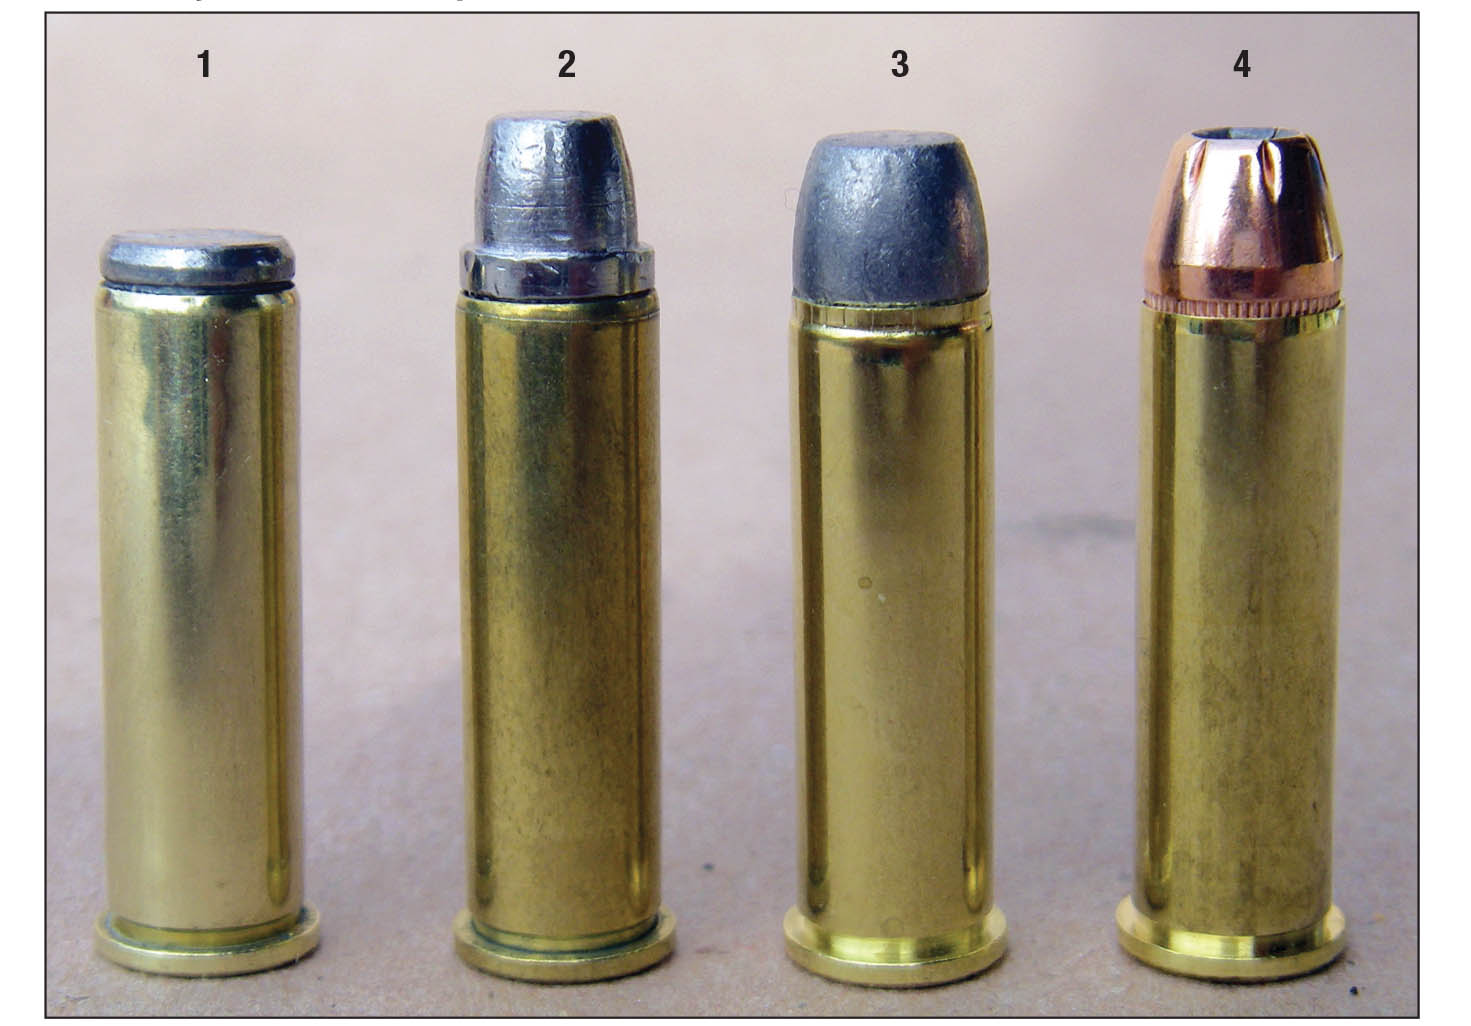 The new Model 1894CS .357 Magnum fed a variety of bullet profiles without a hitch, including a (1) full wadcutter, (2) semiwadcutter, (3) LBT pattern flatpoint and a (4) jacketed hollowpoint.